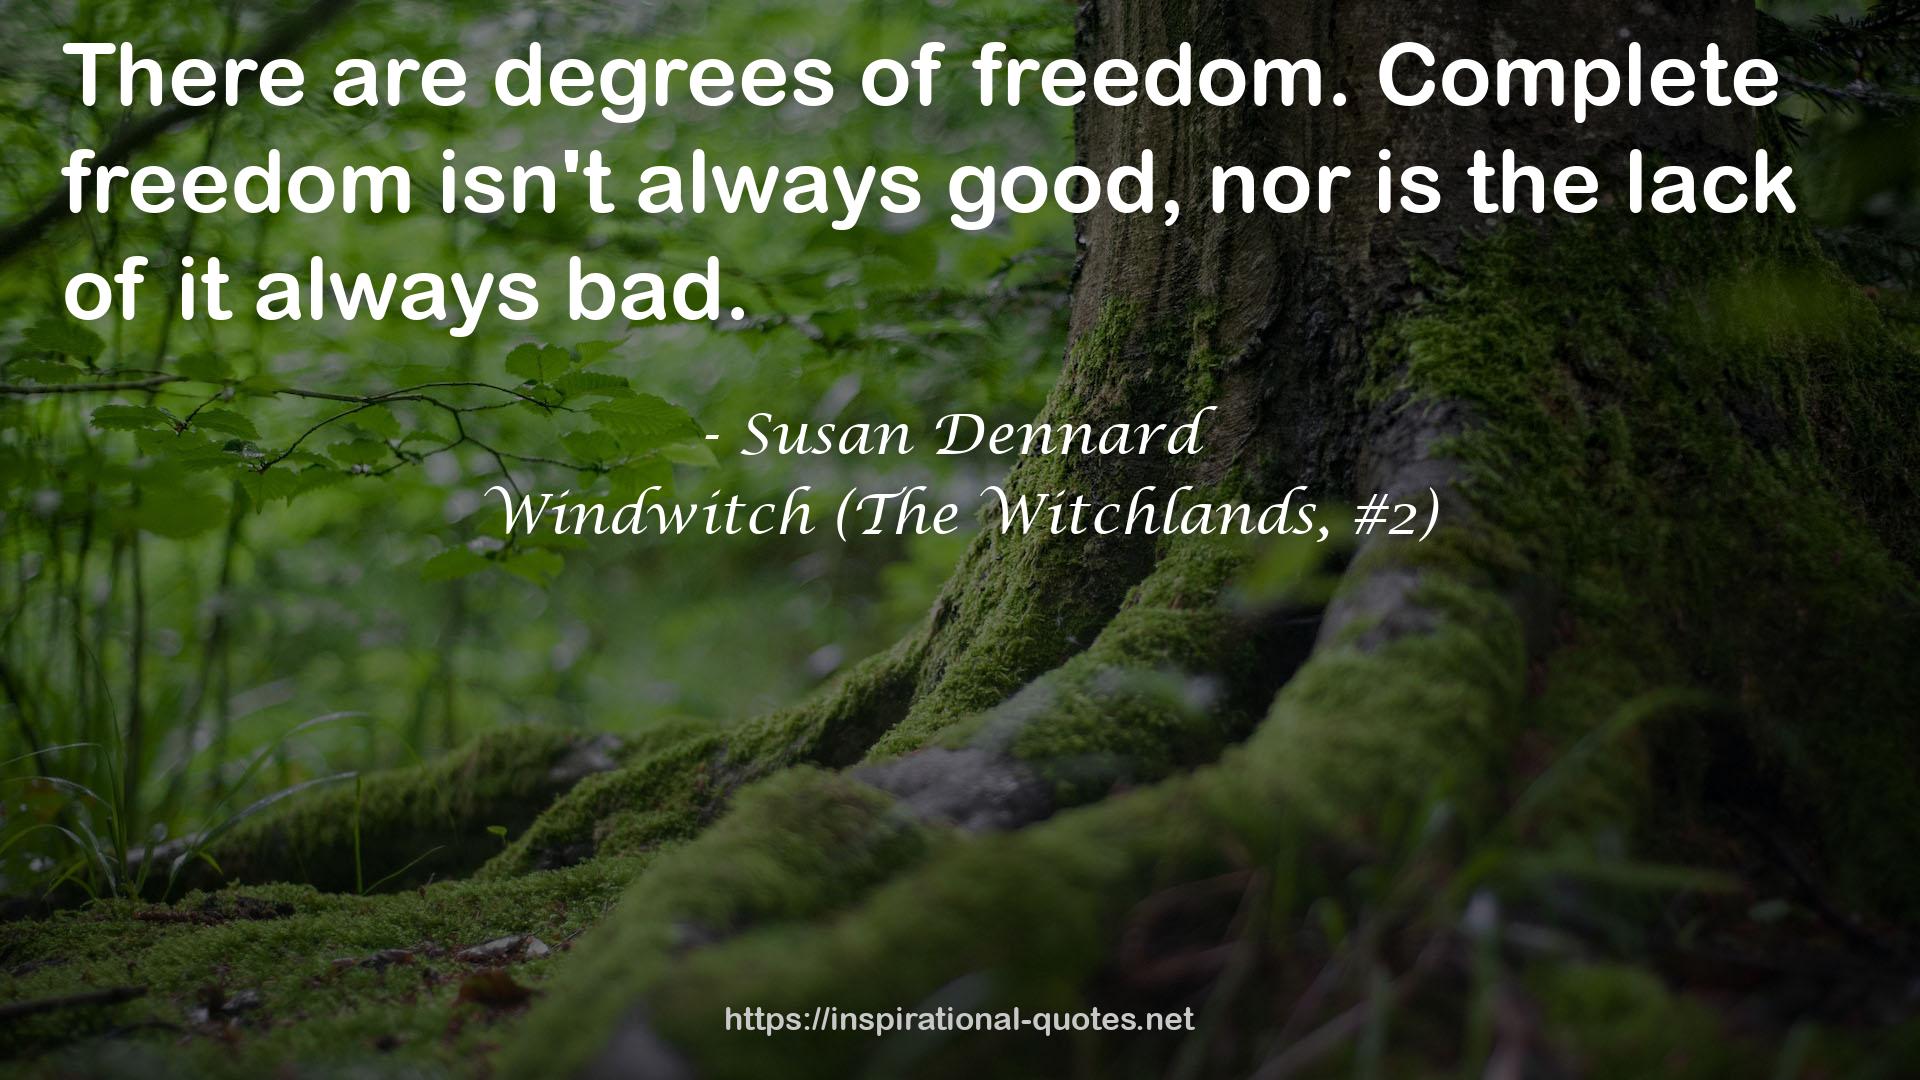 Windwitch (The Witchlands, #2) QUOTES